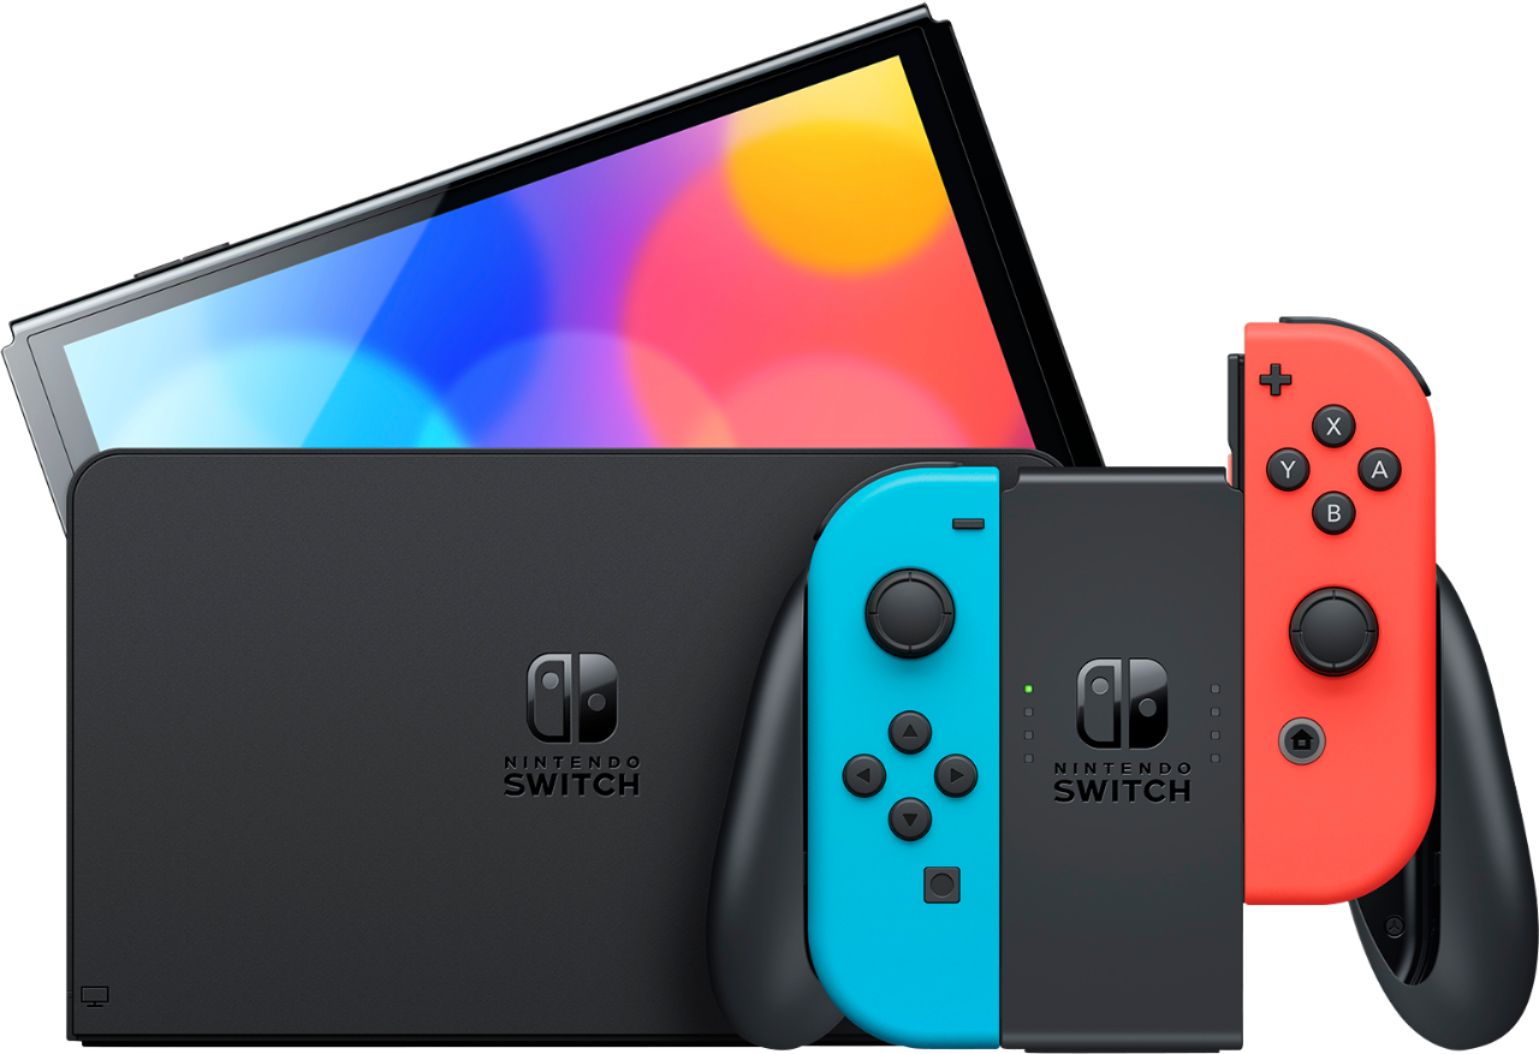 2022 New Nintendo Switch OLED Model Neon Red & Blue Joy Con 64GB Console HD Screen & LAN-Port Dock with Super Mario 3D World + Bowser's Fury, Mytrix 128GB MicroSD Card and Accessories